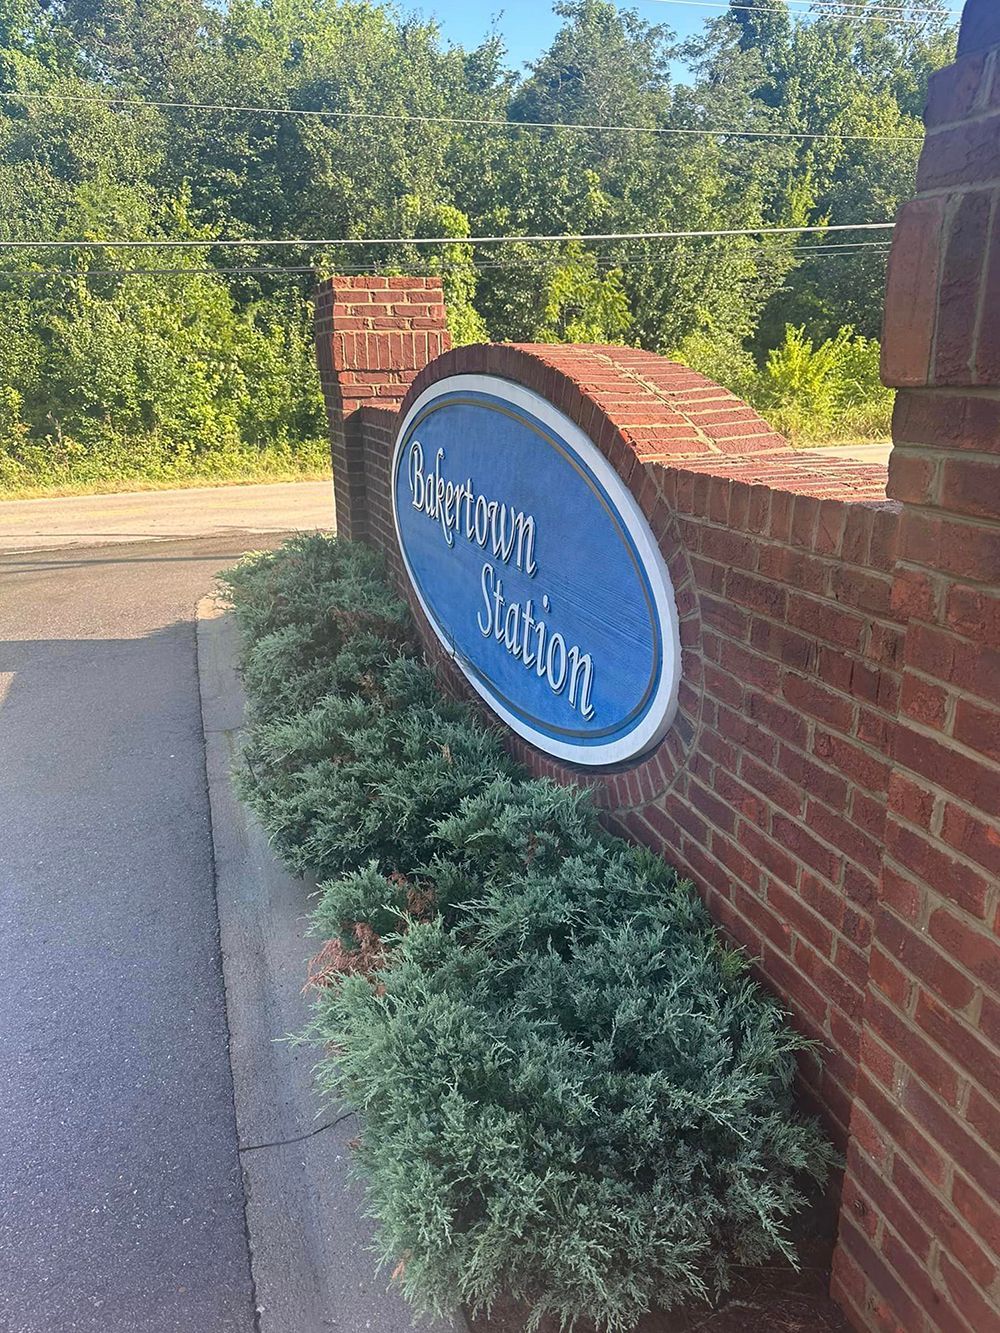 A blue sign on a brick wall next to a road